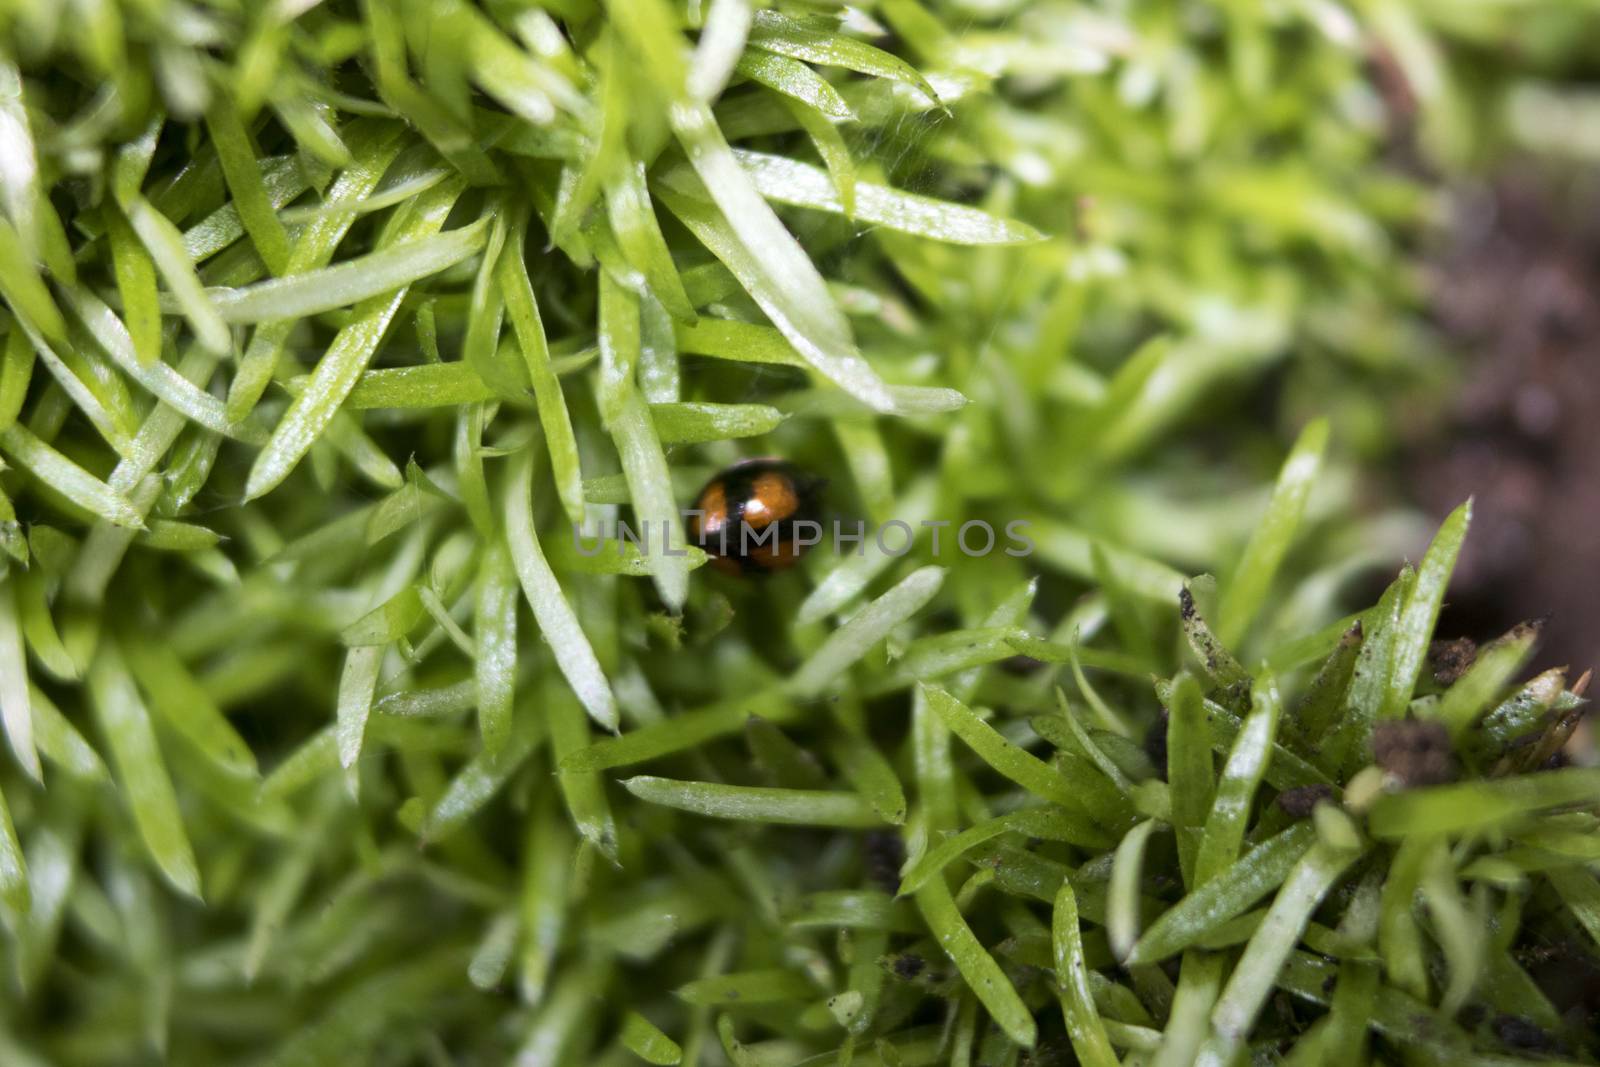 Little red ladybug crawling on a blade of grass on the green blurry background by vector1st